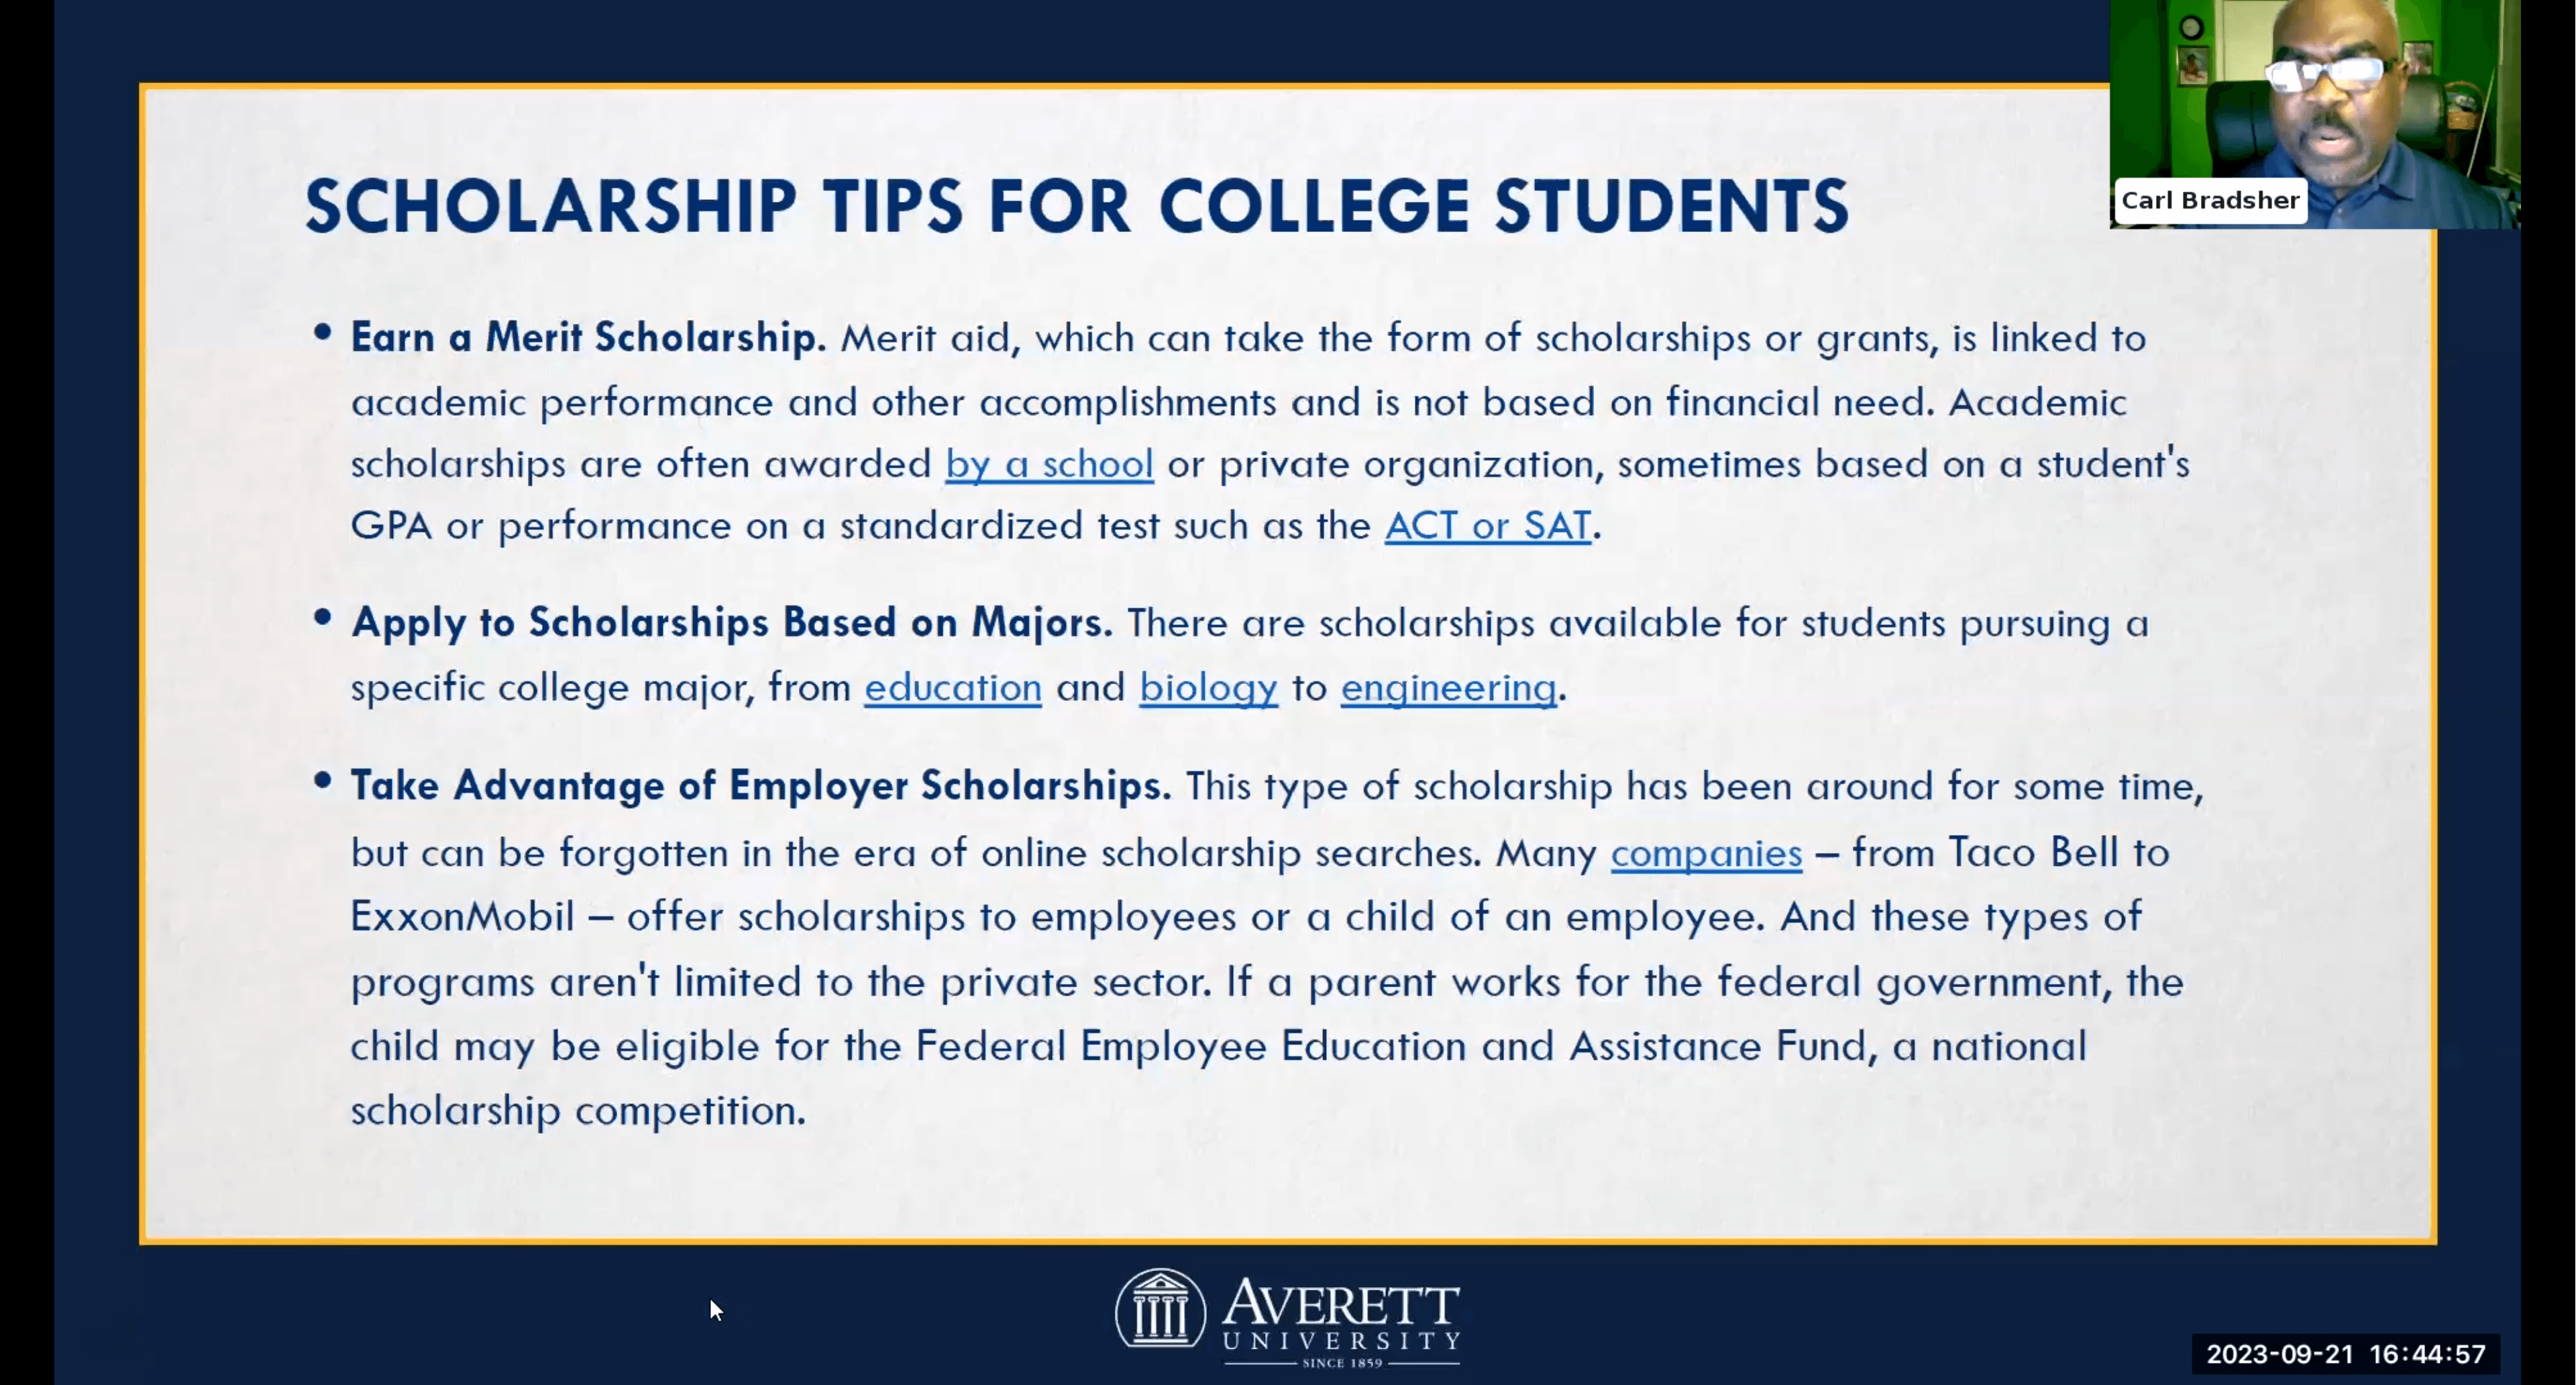 Explore employer scholarships and tuition reimbursement plans. Also consider scholarships from paren